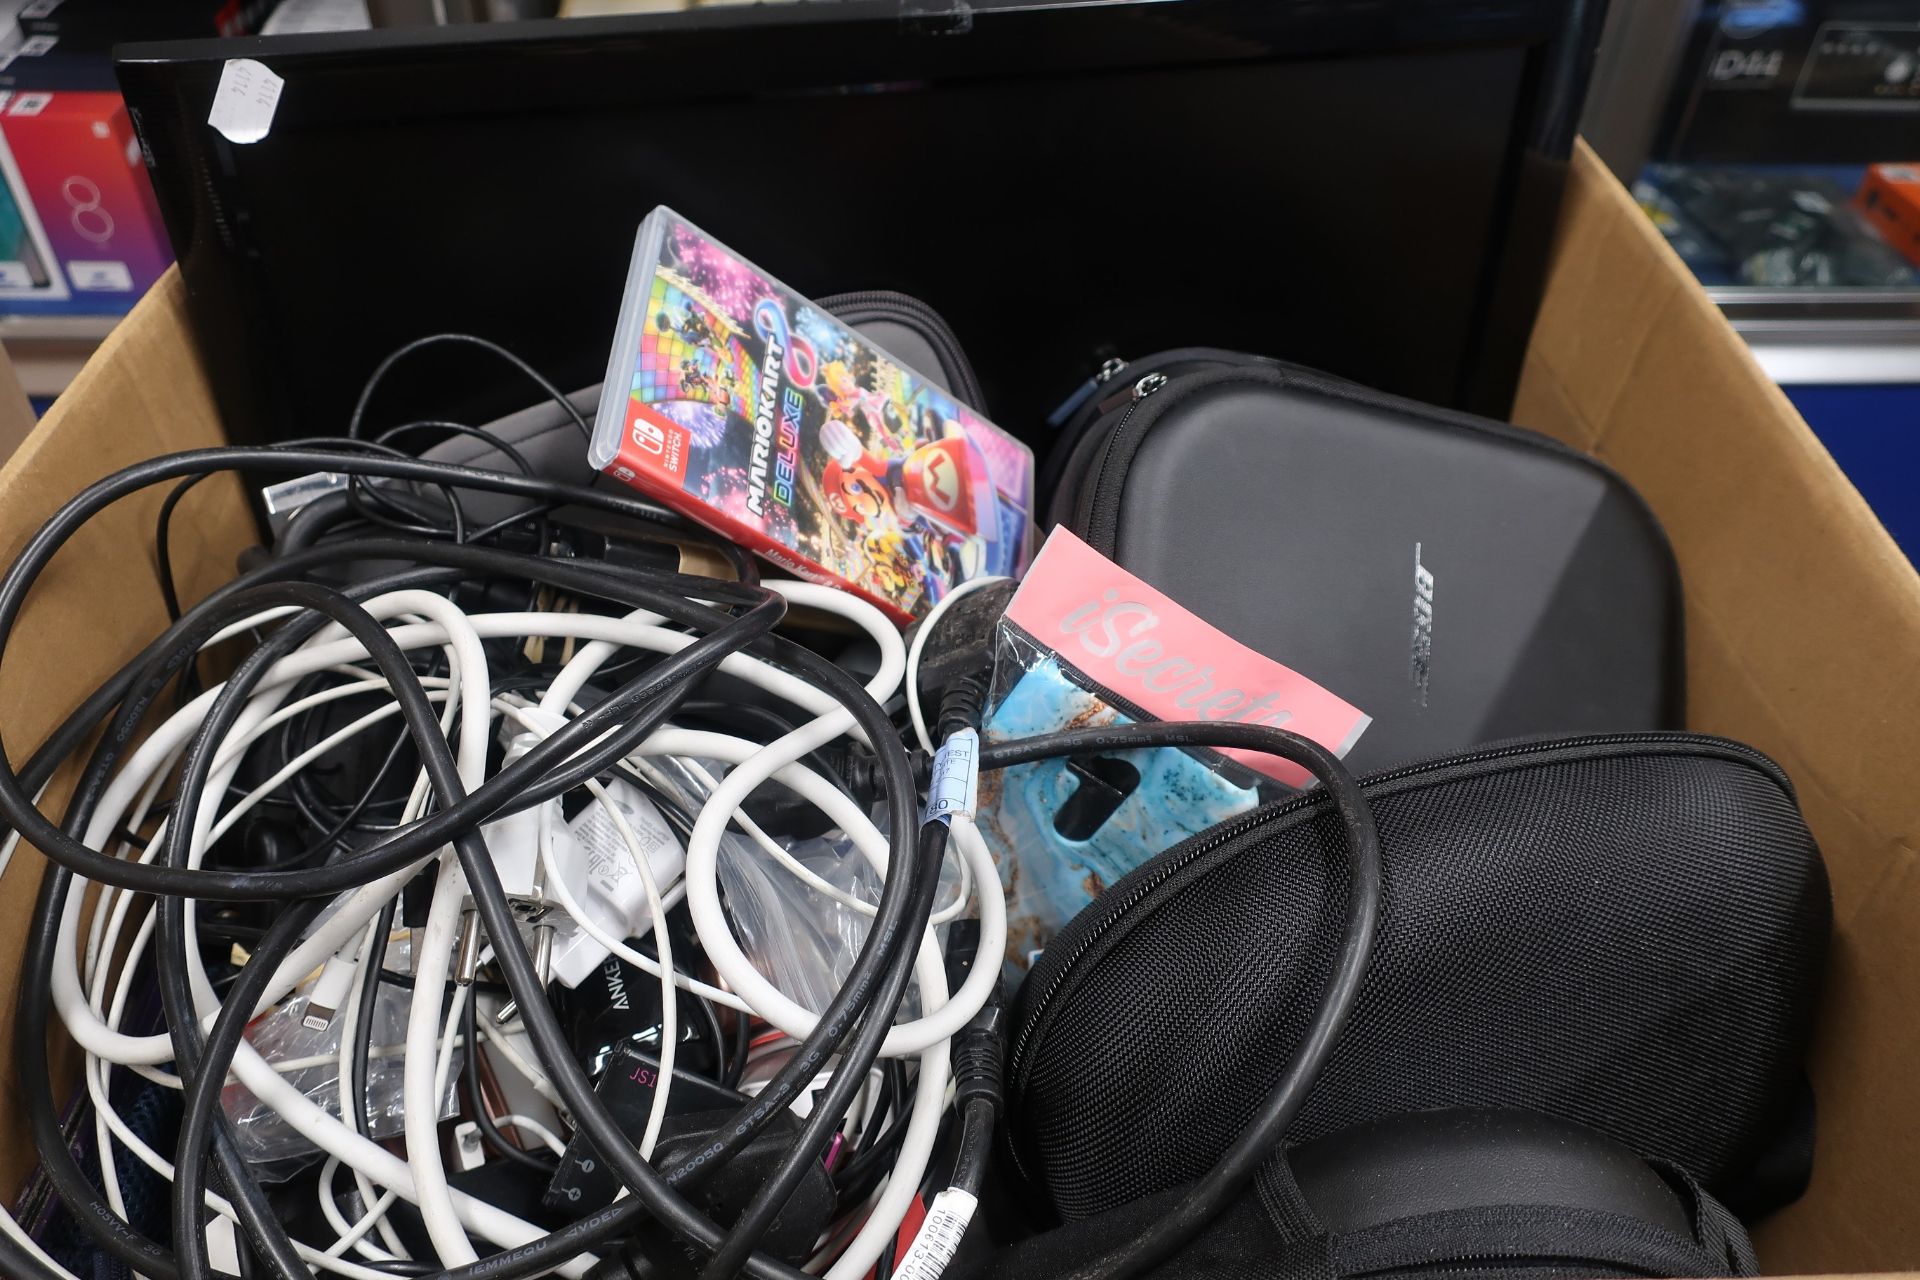 A box of assorted pre-owned small electrical items, chargers, cables and cases.